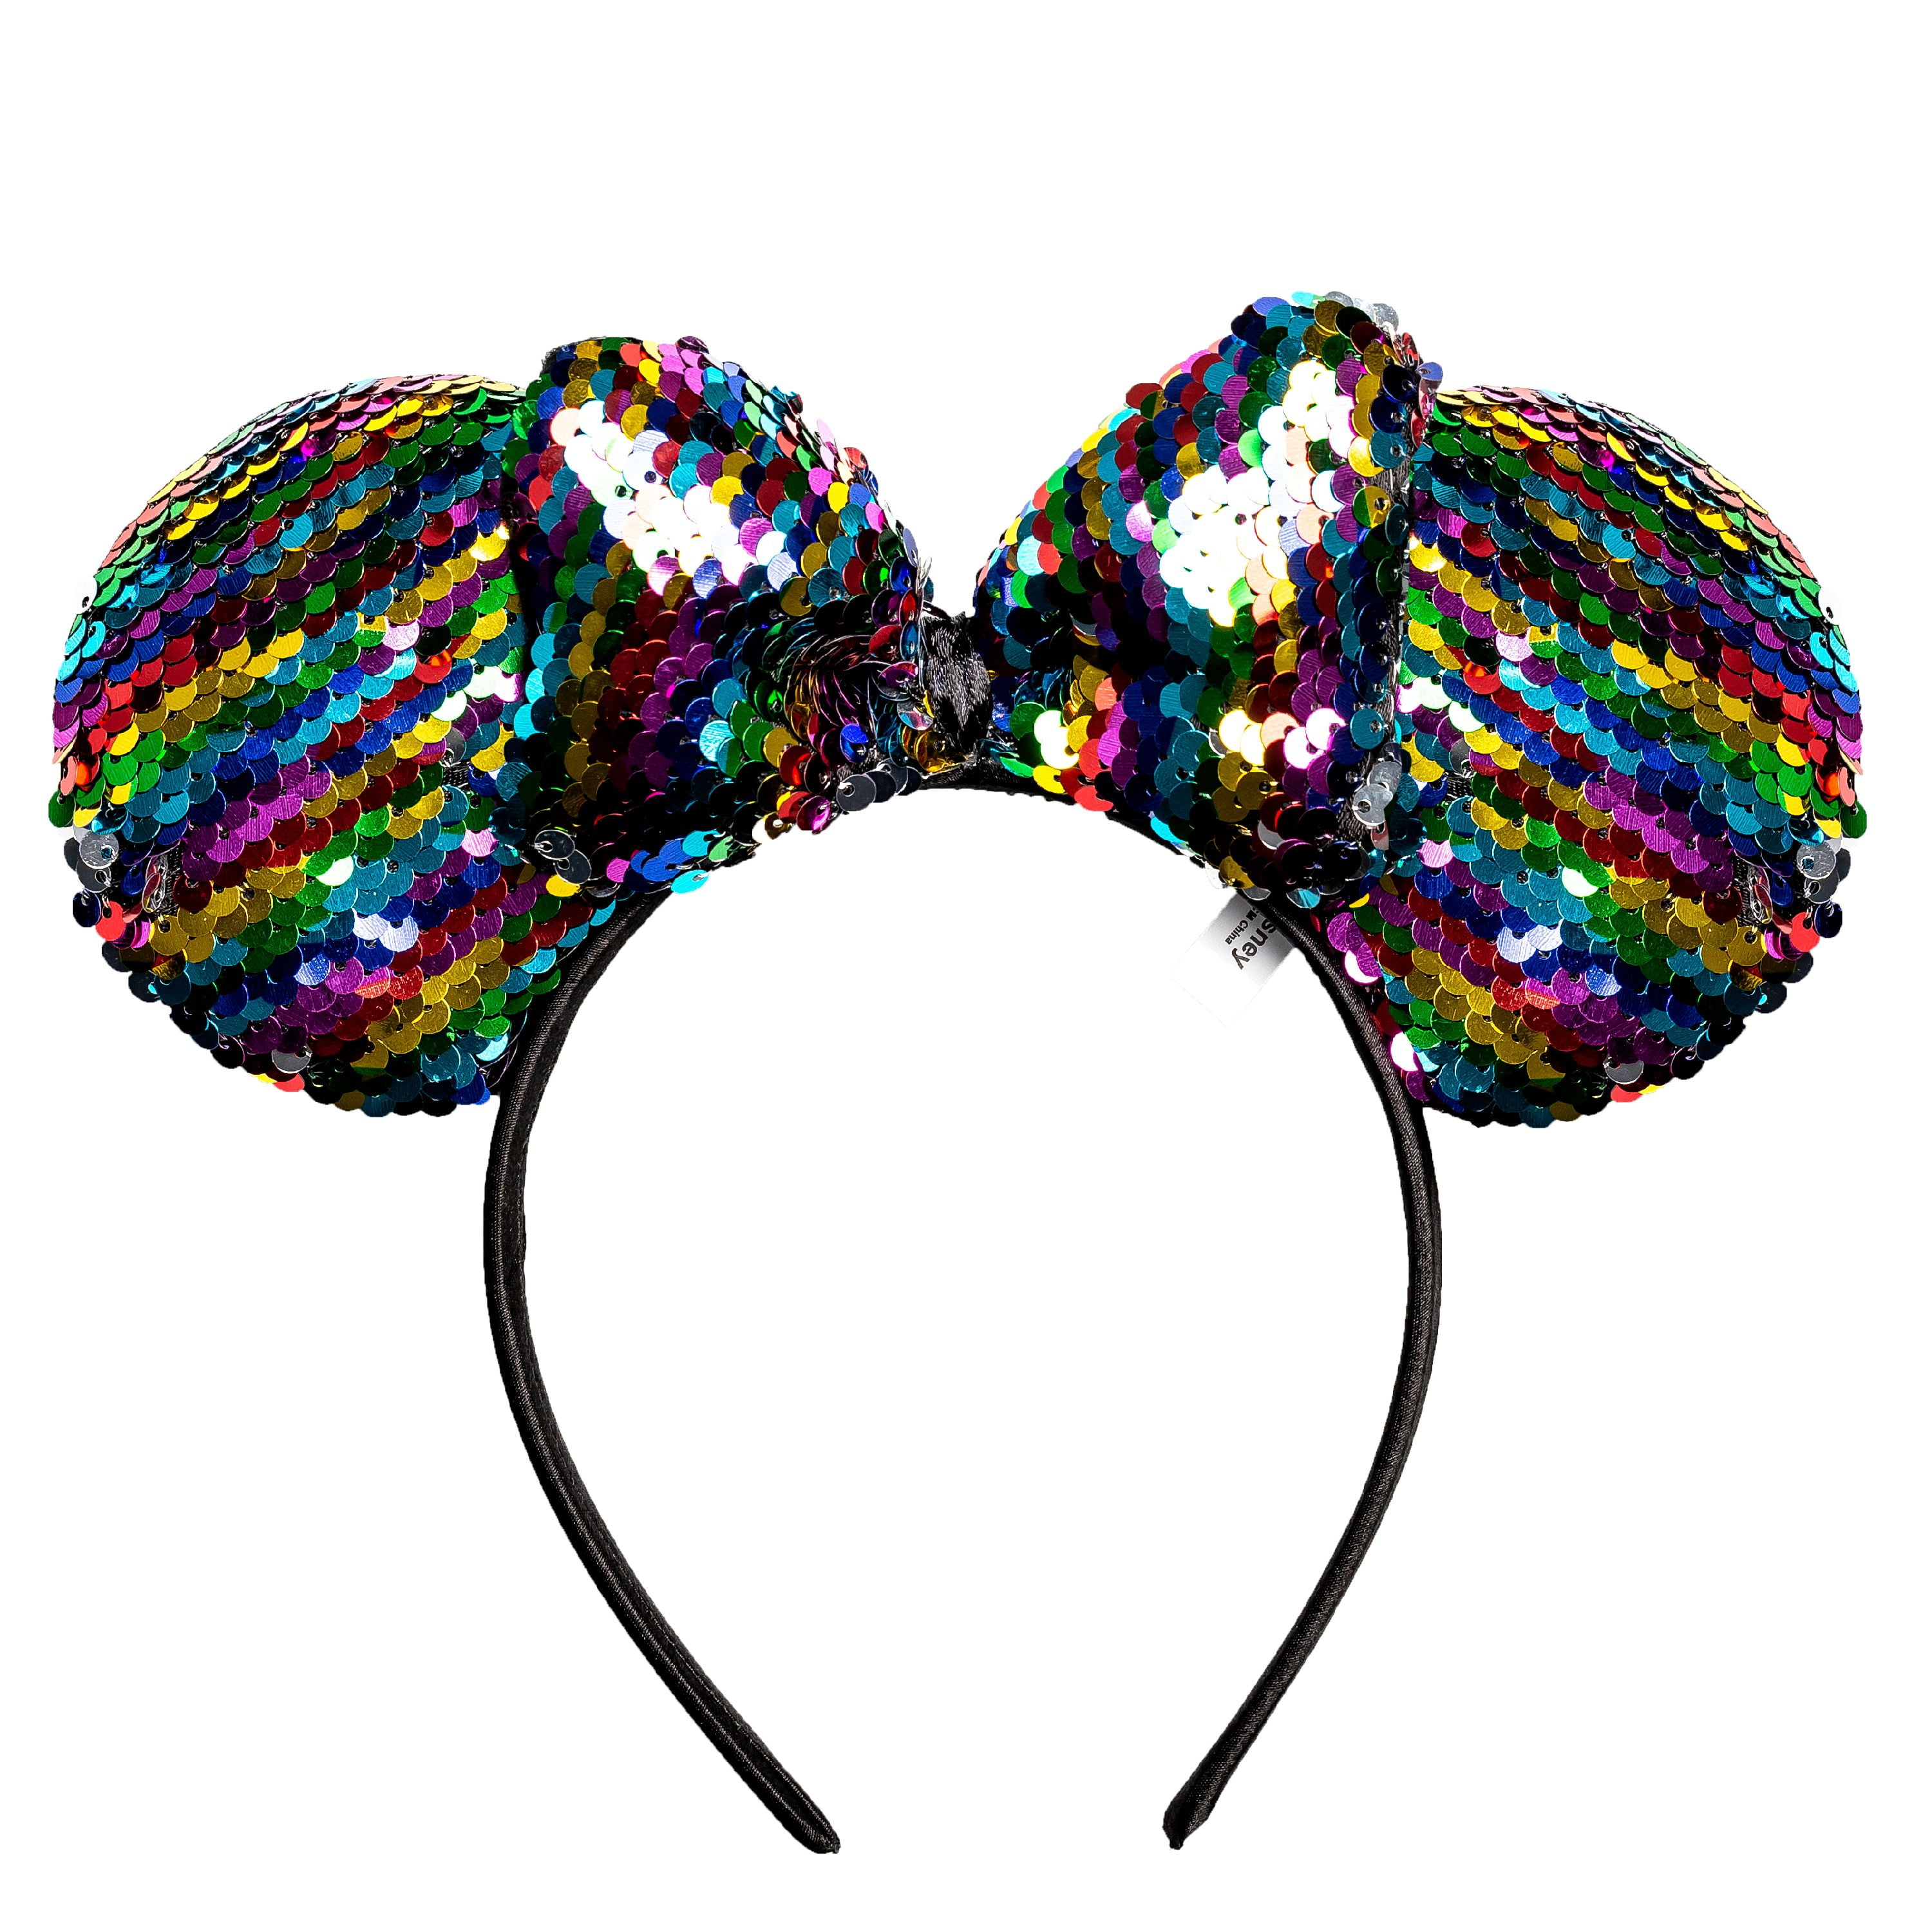 Details about   Disney Parks Candle Multicolor 2020 Minnie Ears Sequins Glitter Headband #102 